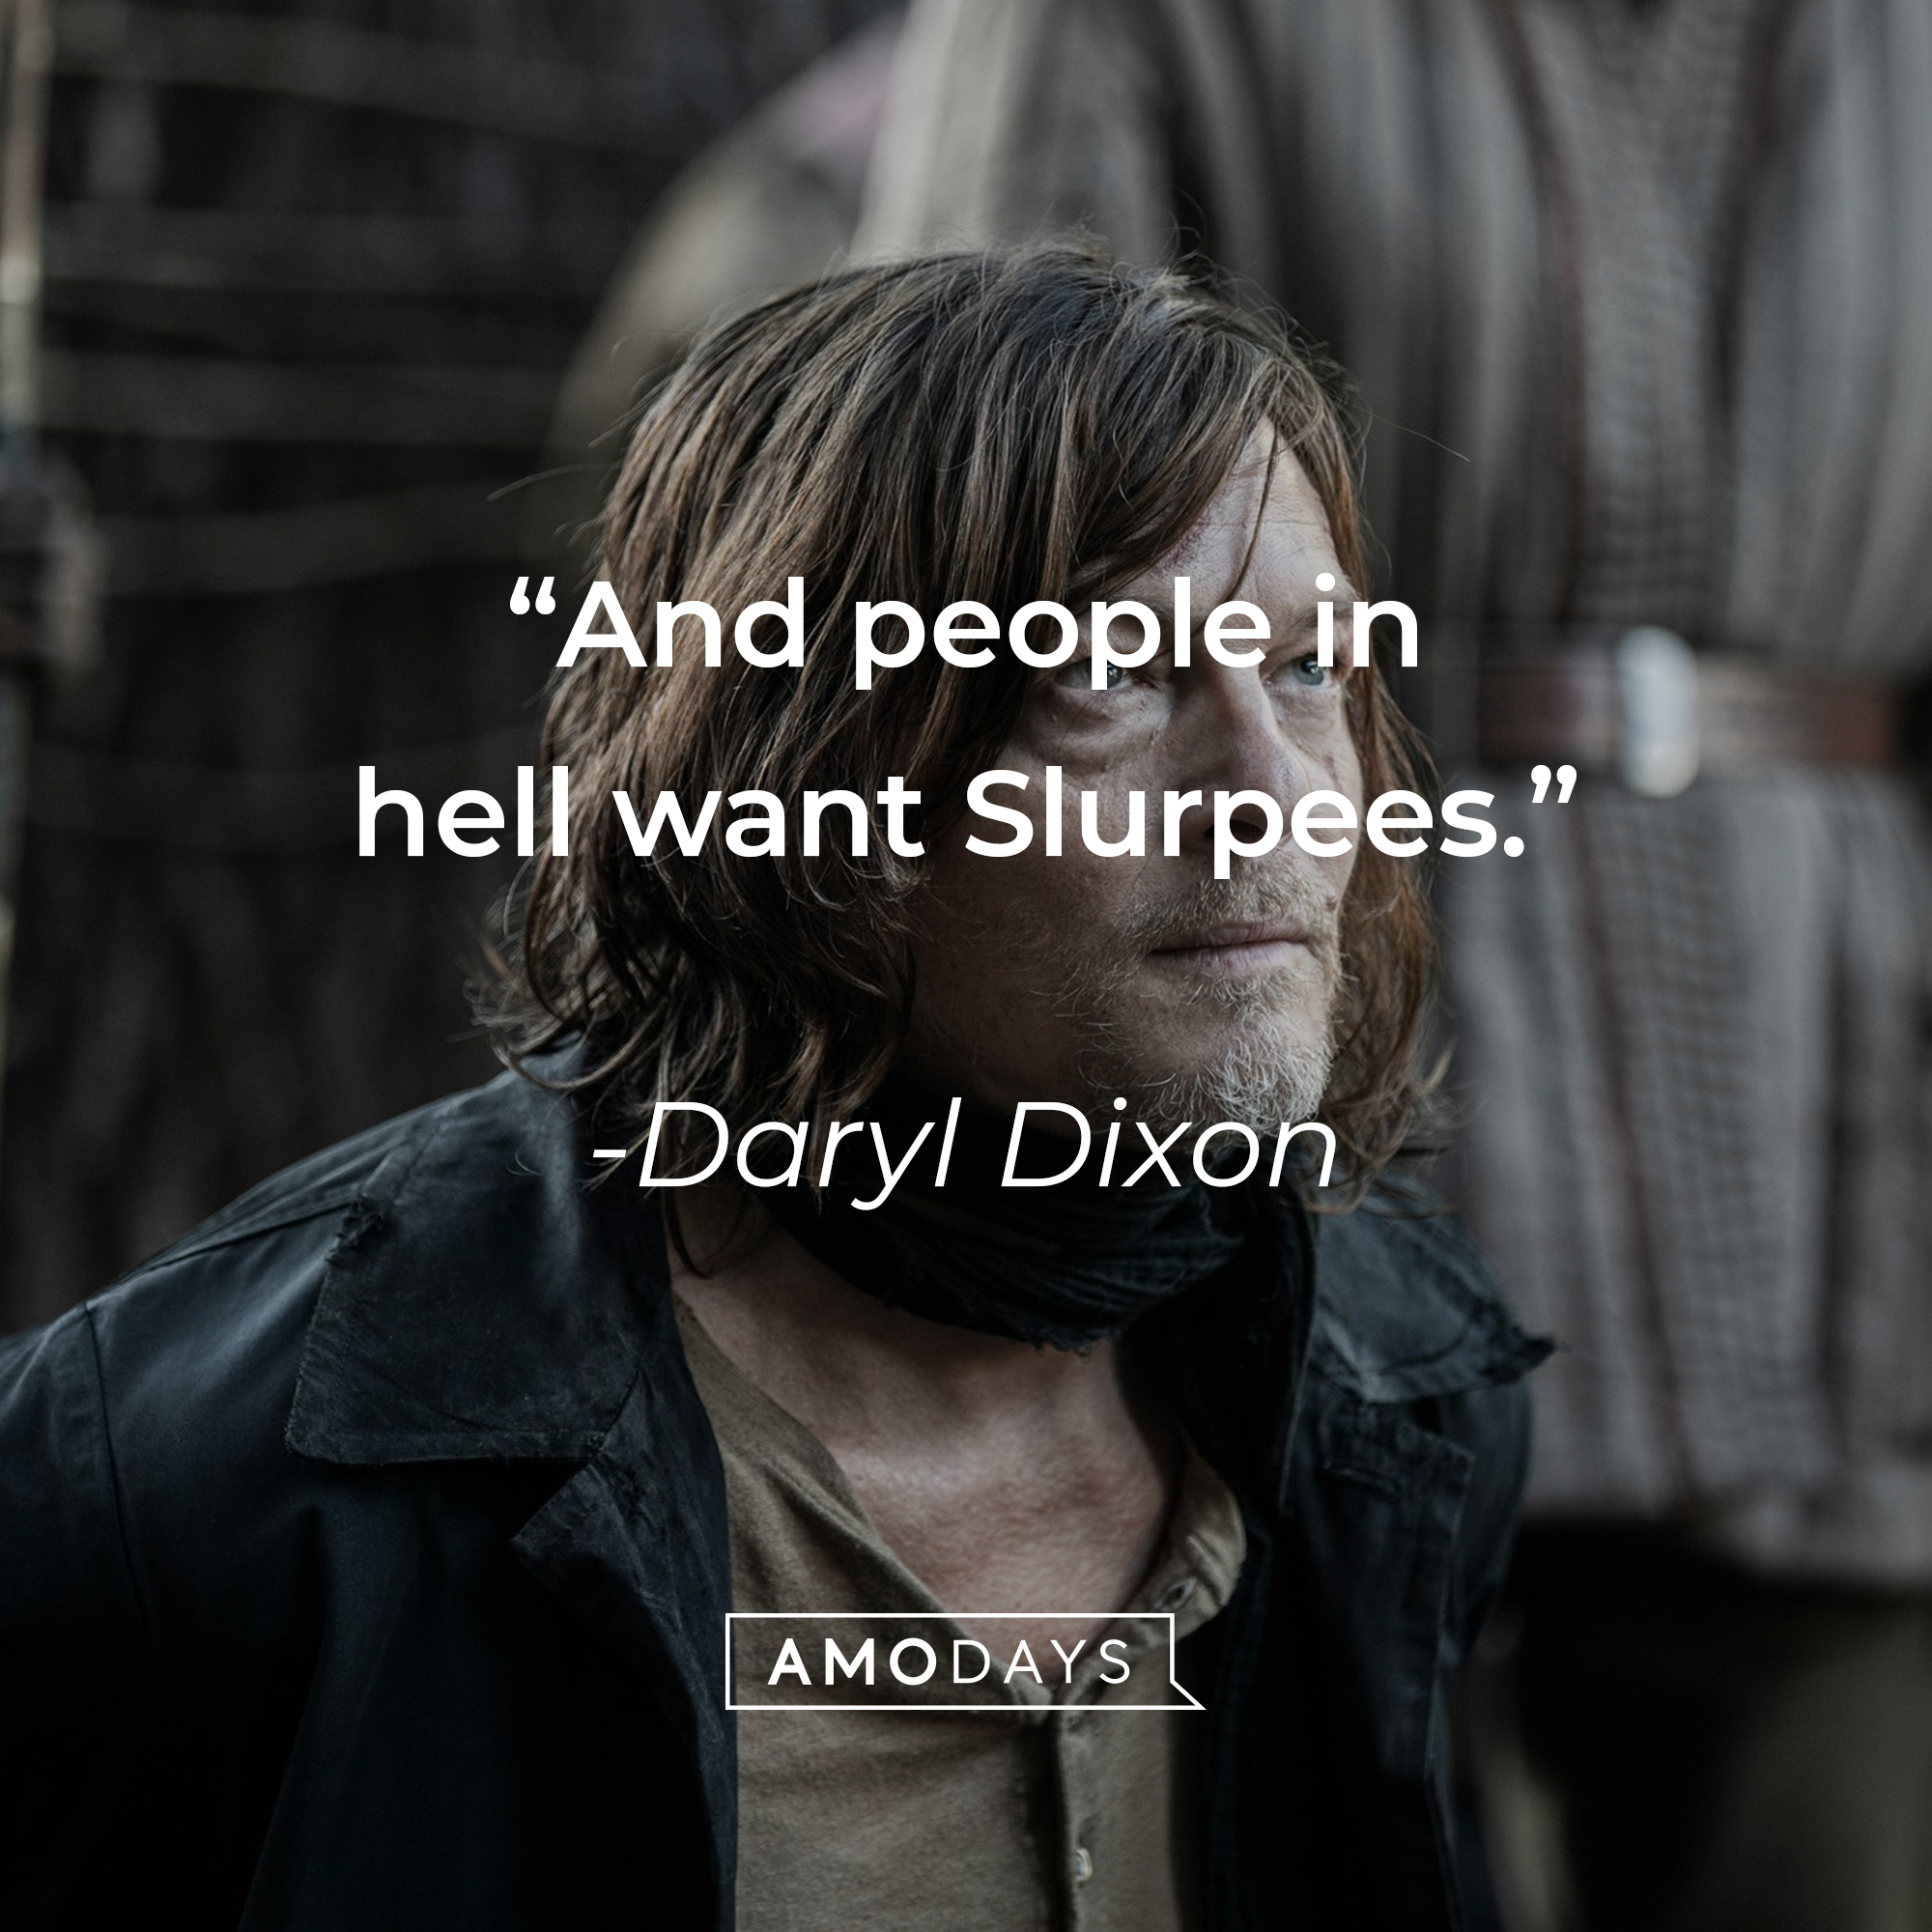 An image of Daryl Dixon with his quote: “And people in hell want Slurpees.” | Source: facebook.com/TheWalkingDeadAMC